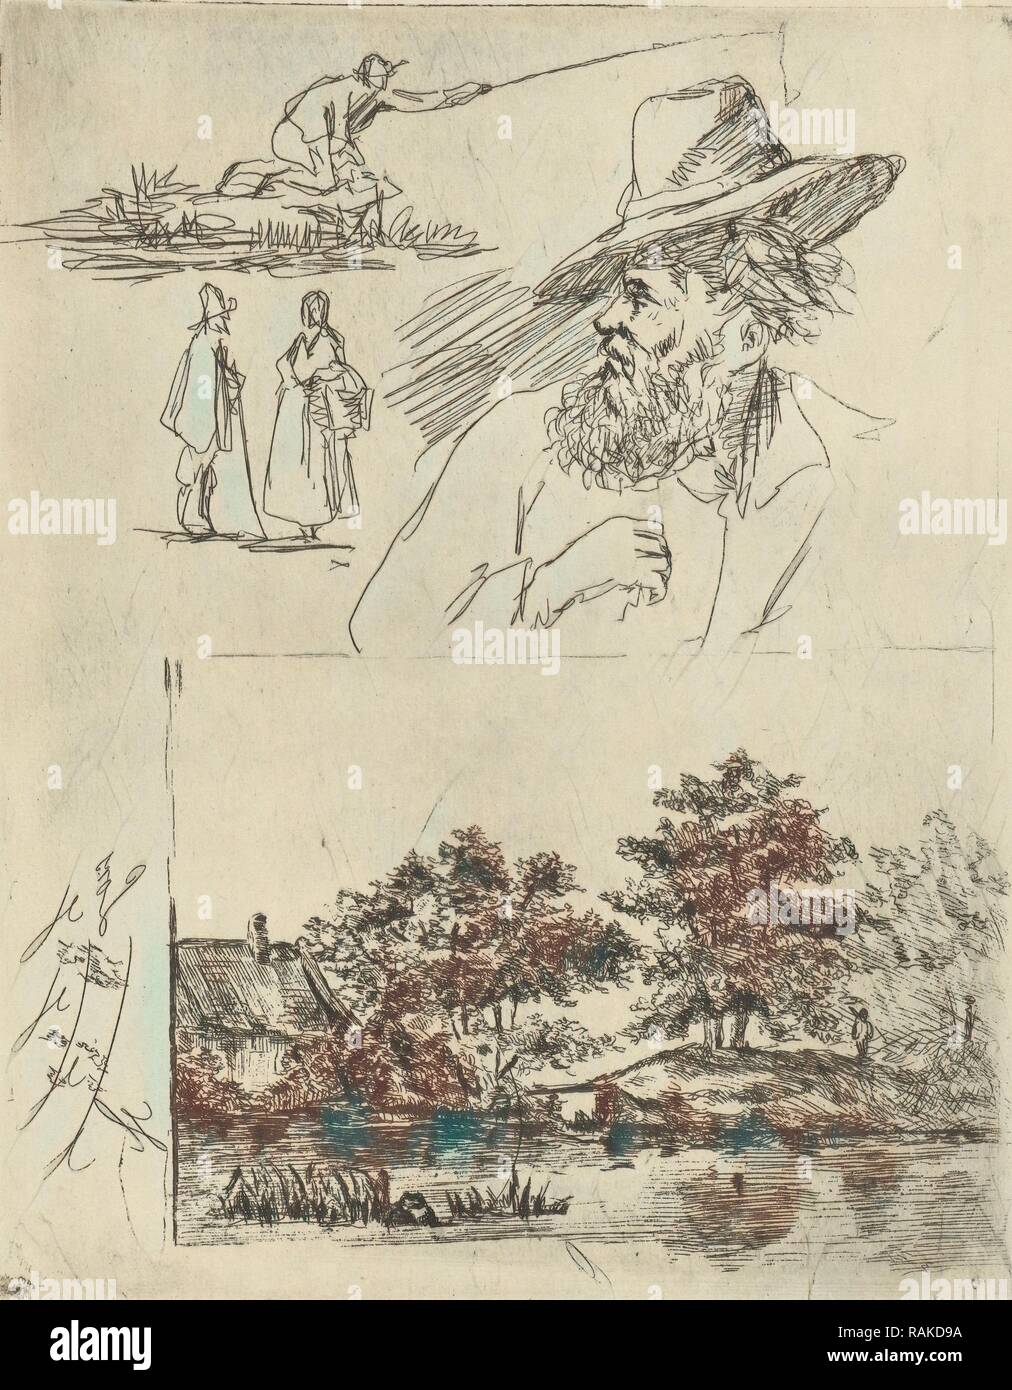 Study Journal of three figures, one is fishing, head of an older man with beard and hat and a landscape with a river reimagined Stock Photo